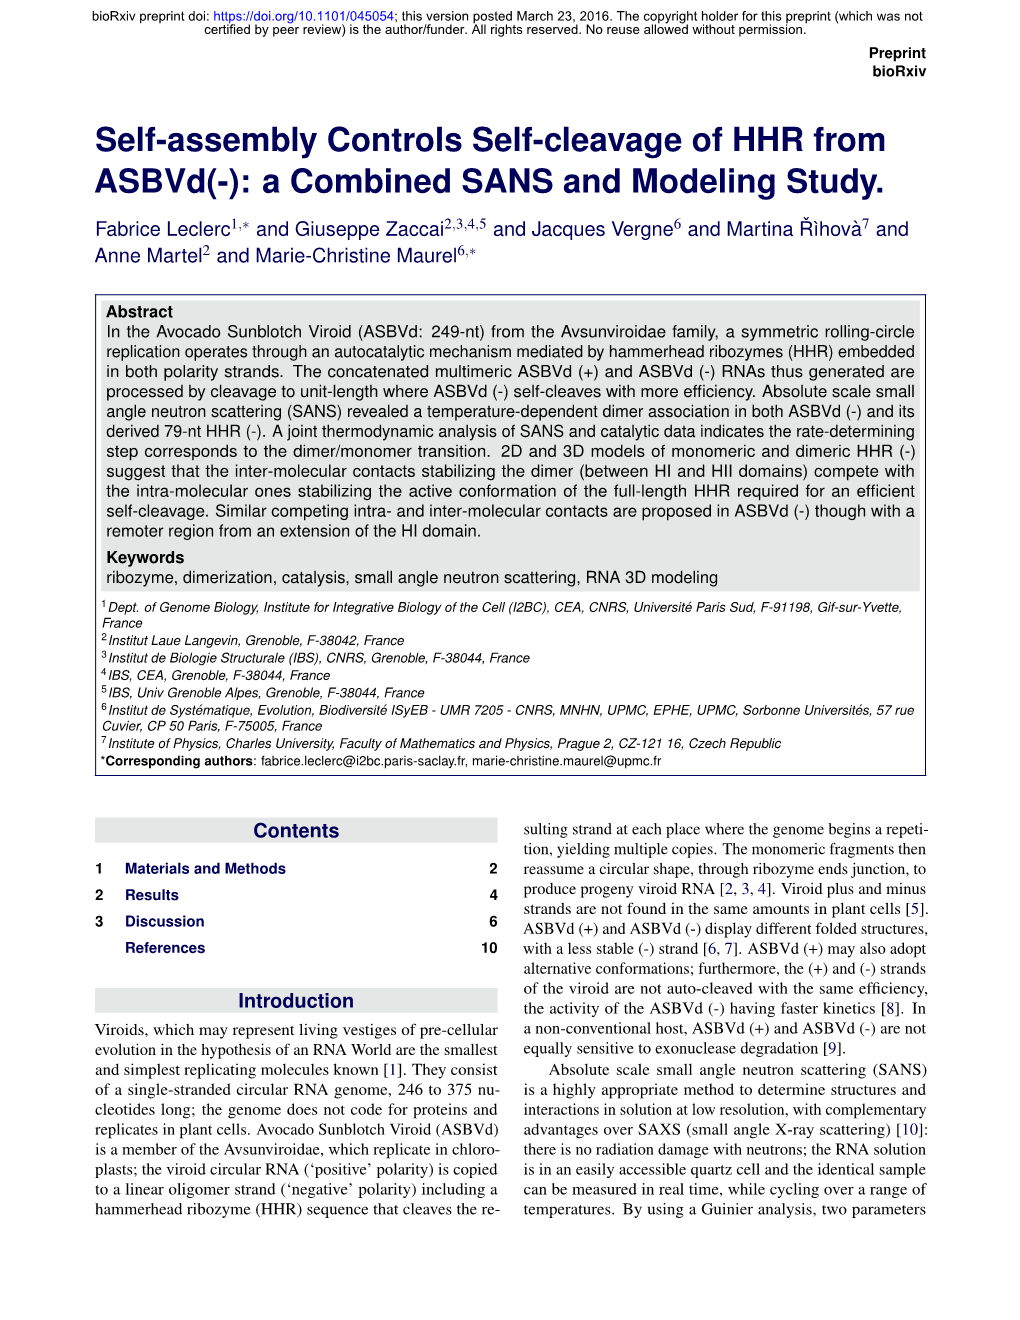 Self-Assembly Controls Self-Cleavage of HHR from Asbvd(-): a Combined SANS and Modeling Study